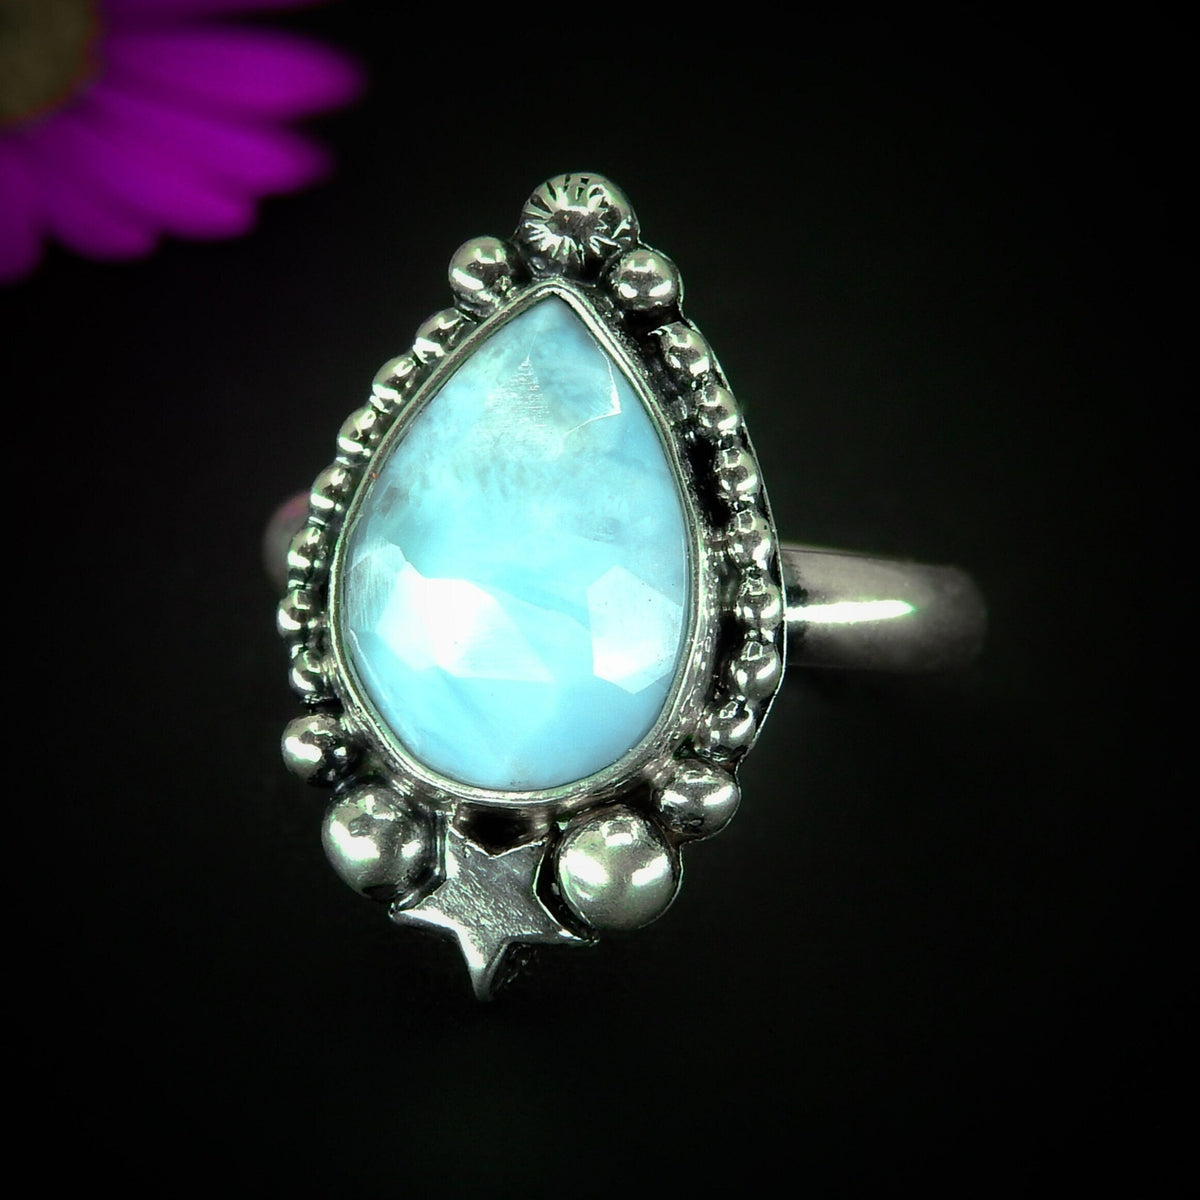 Rose Cut Larimar Ring - Size 8 1/4 - Sterling Silver - Blue Larimar Ring - Teardrop Larimar Jewelry - Handcrafted Faceted Larimar Star Ring